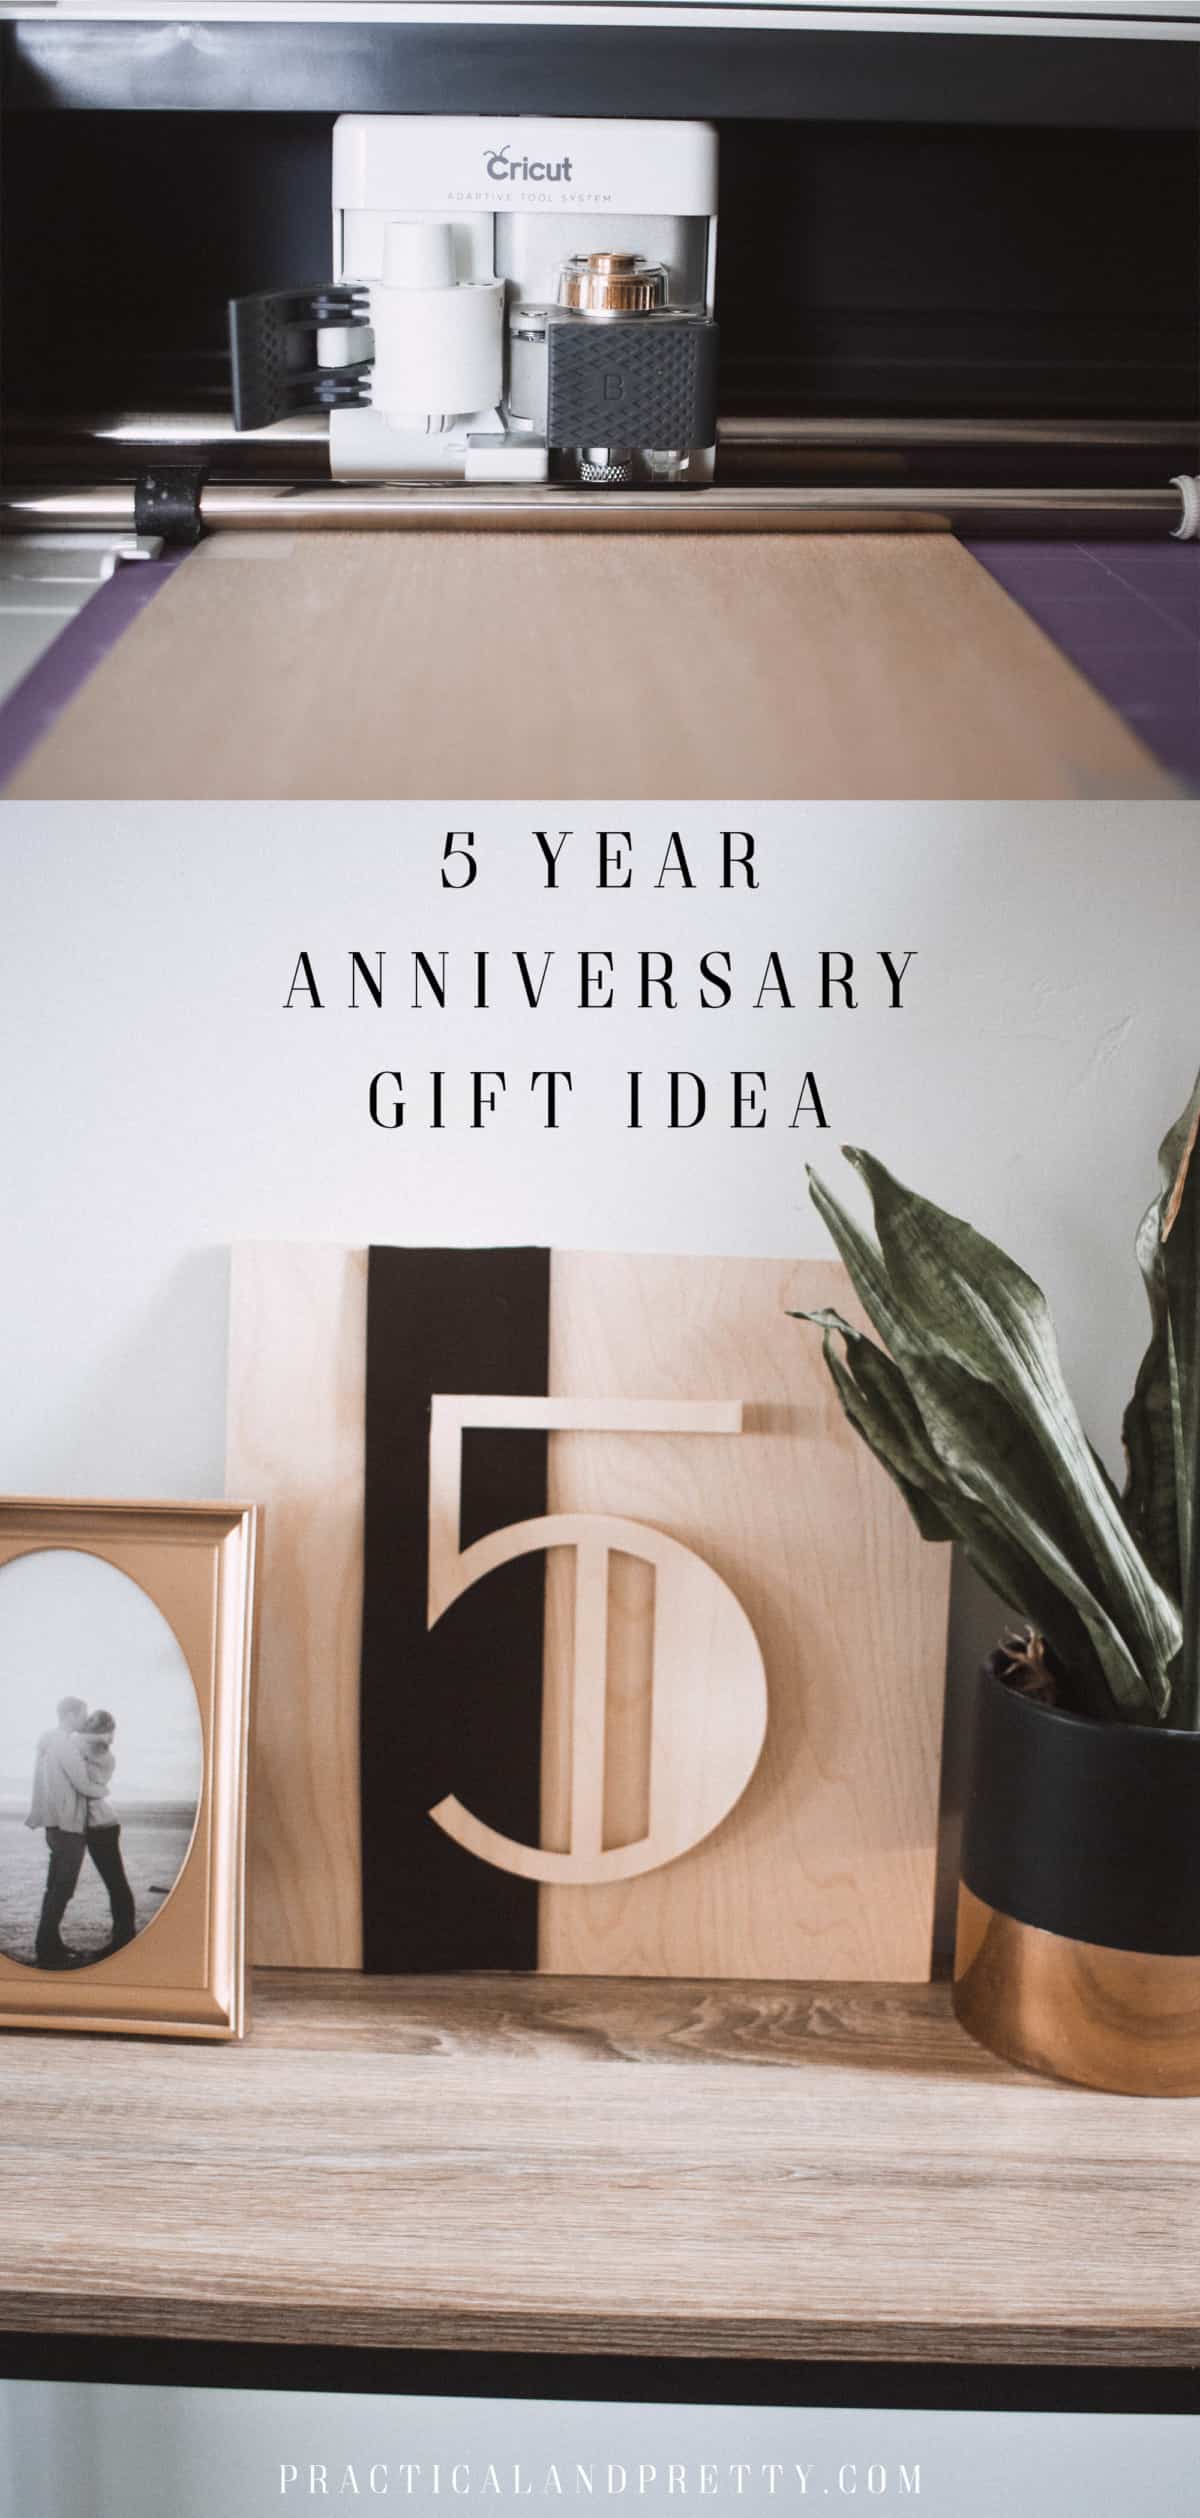 Use your Cricut Maker to make a 5 year anniversary gift for your spouse or maybe a couple close to you celebrating their big 5! 